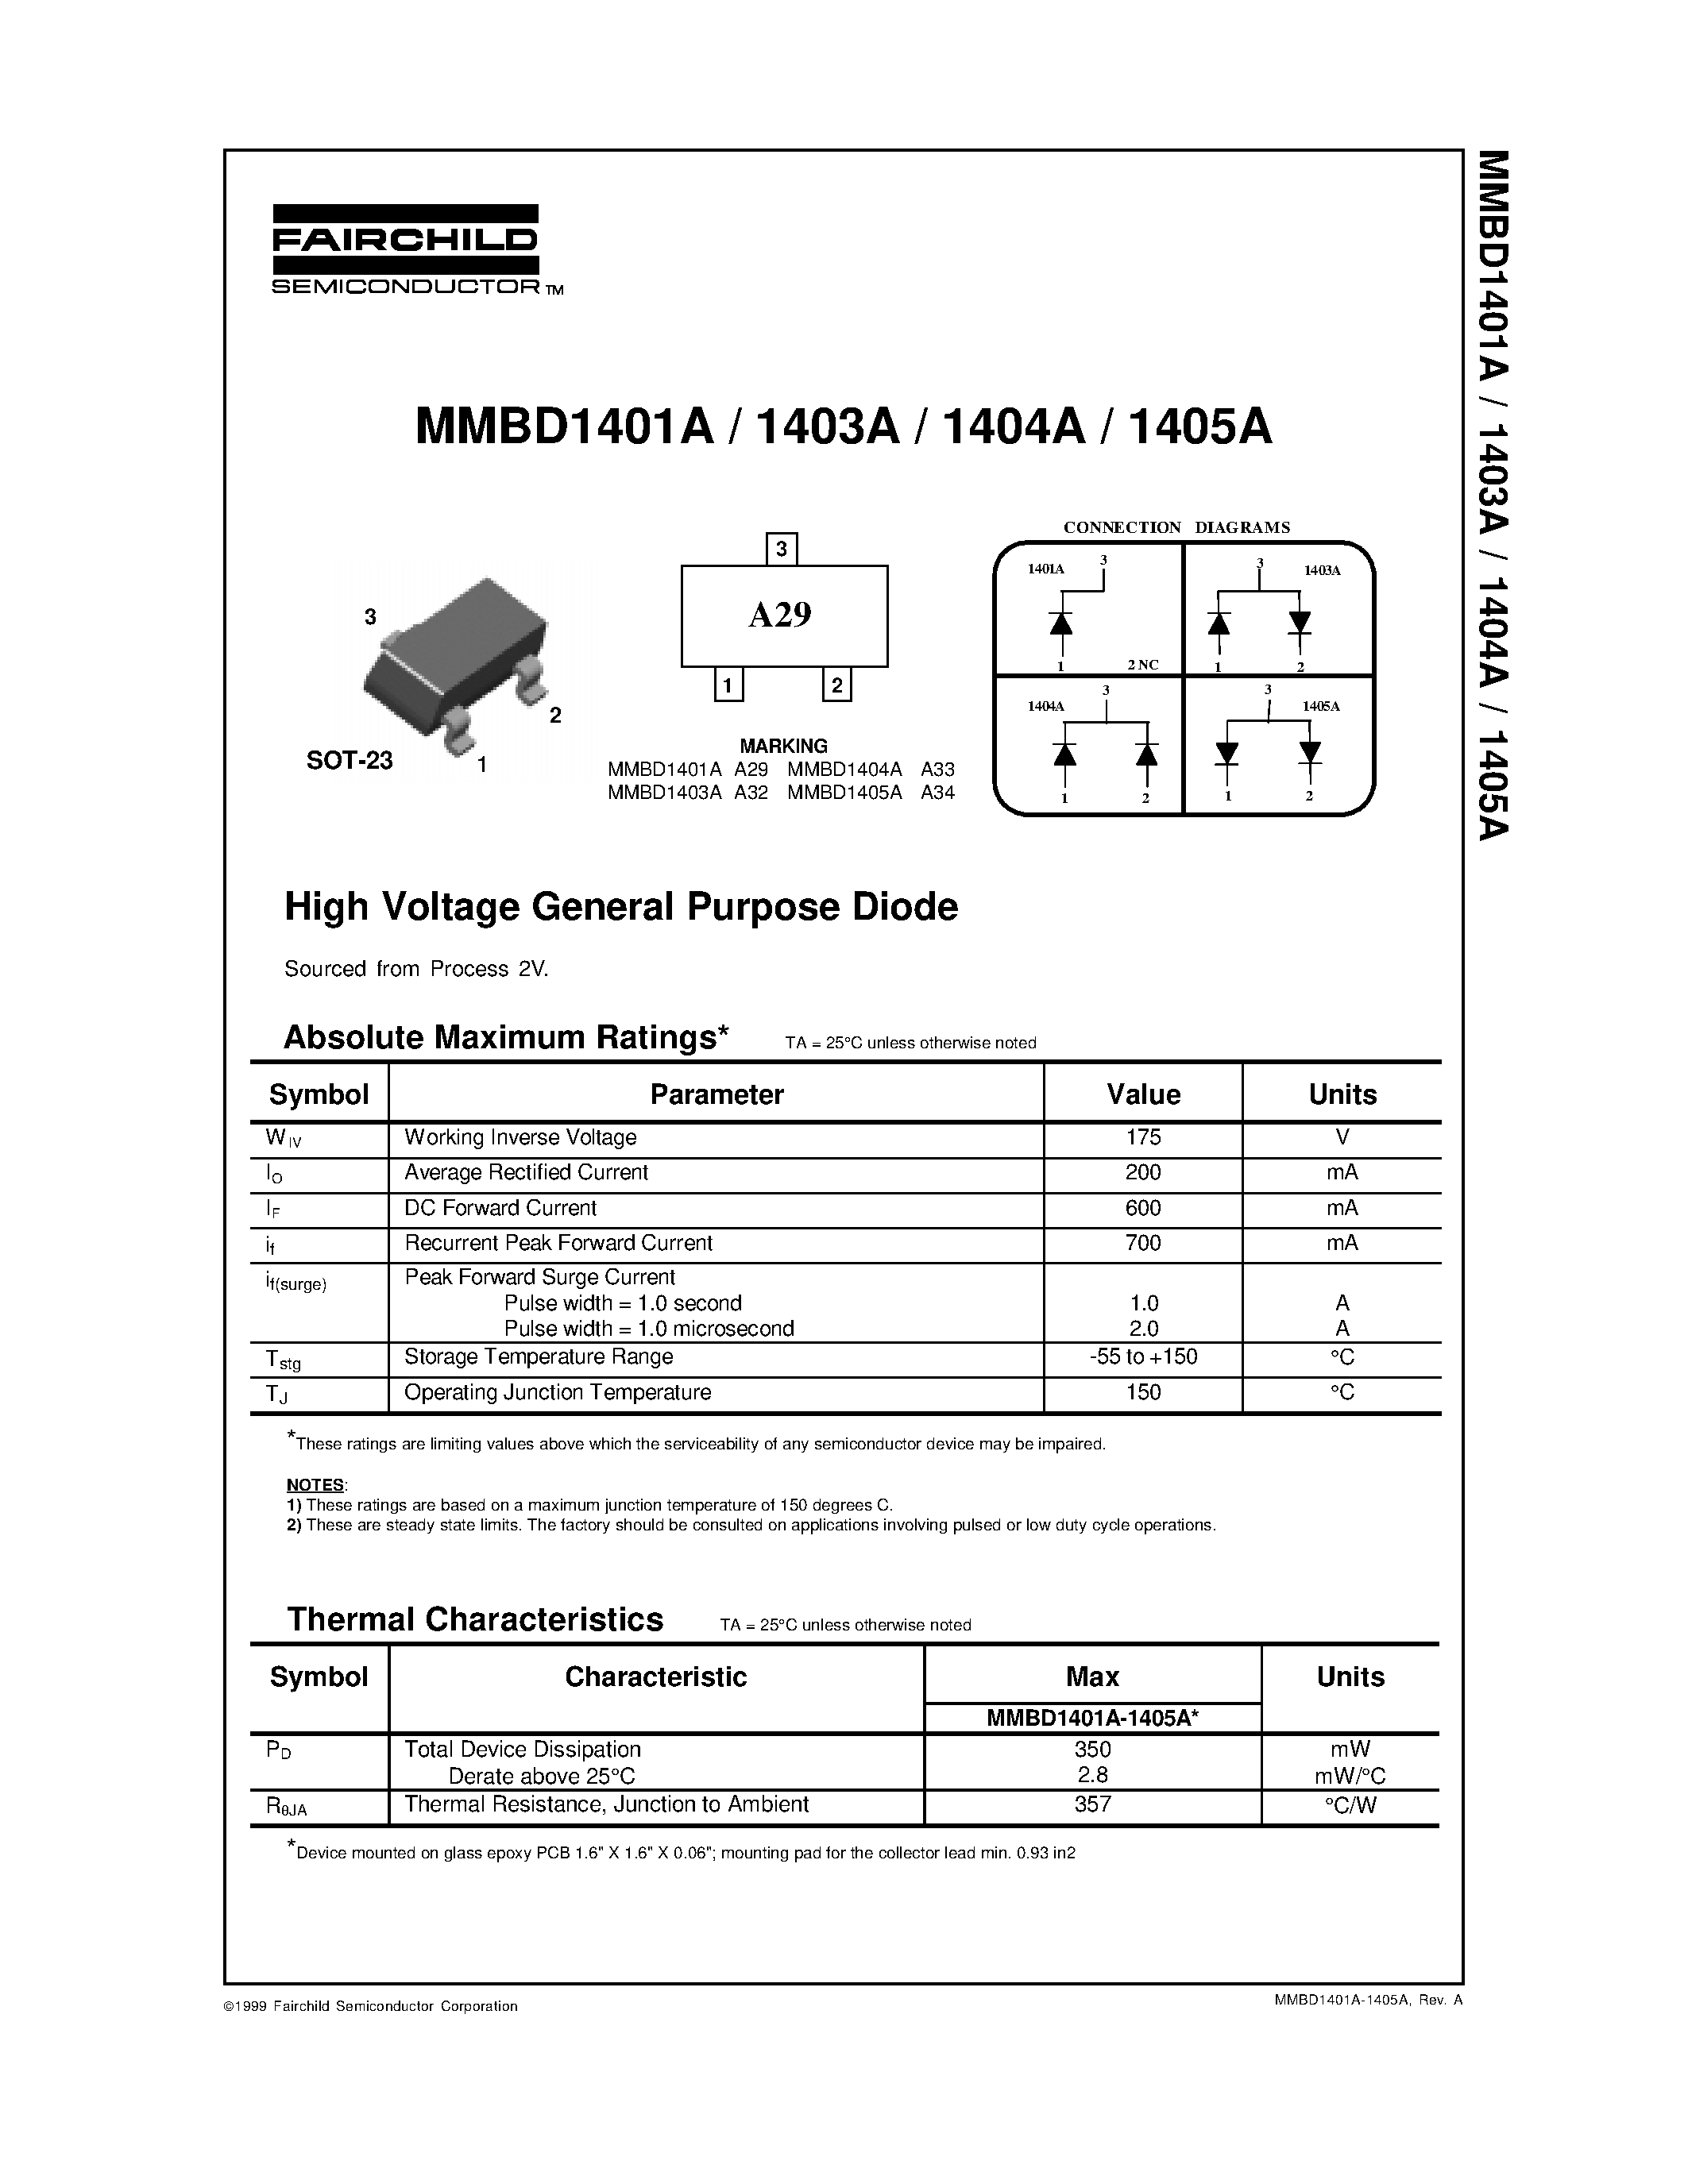 Даташит MMBD1401A - High Voltage General Purpose Diode страница 1